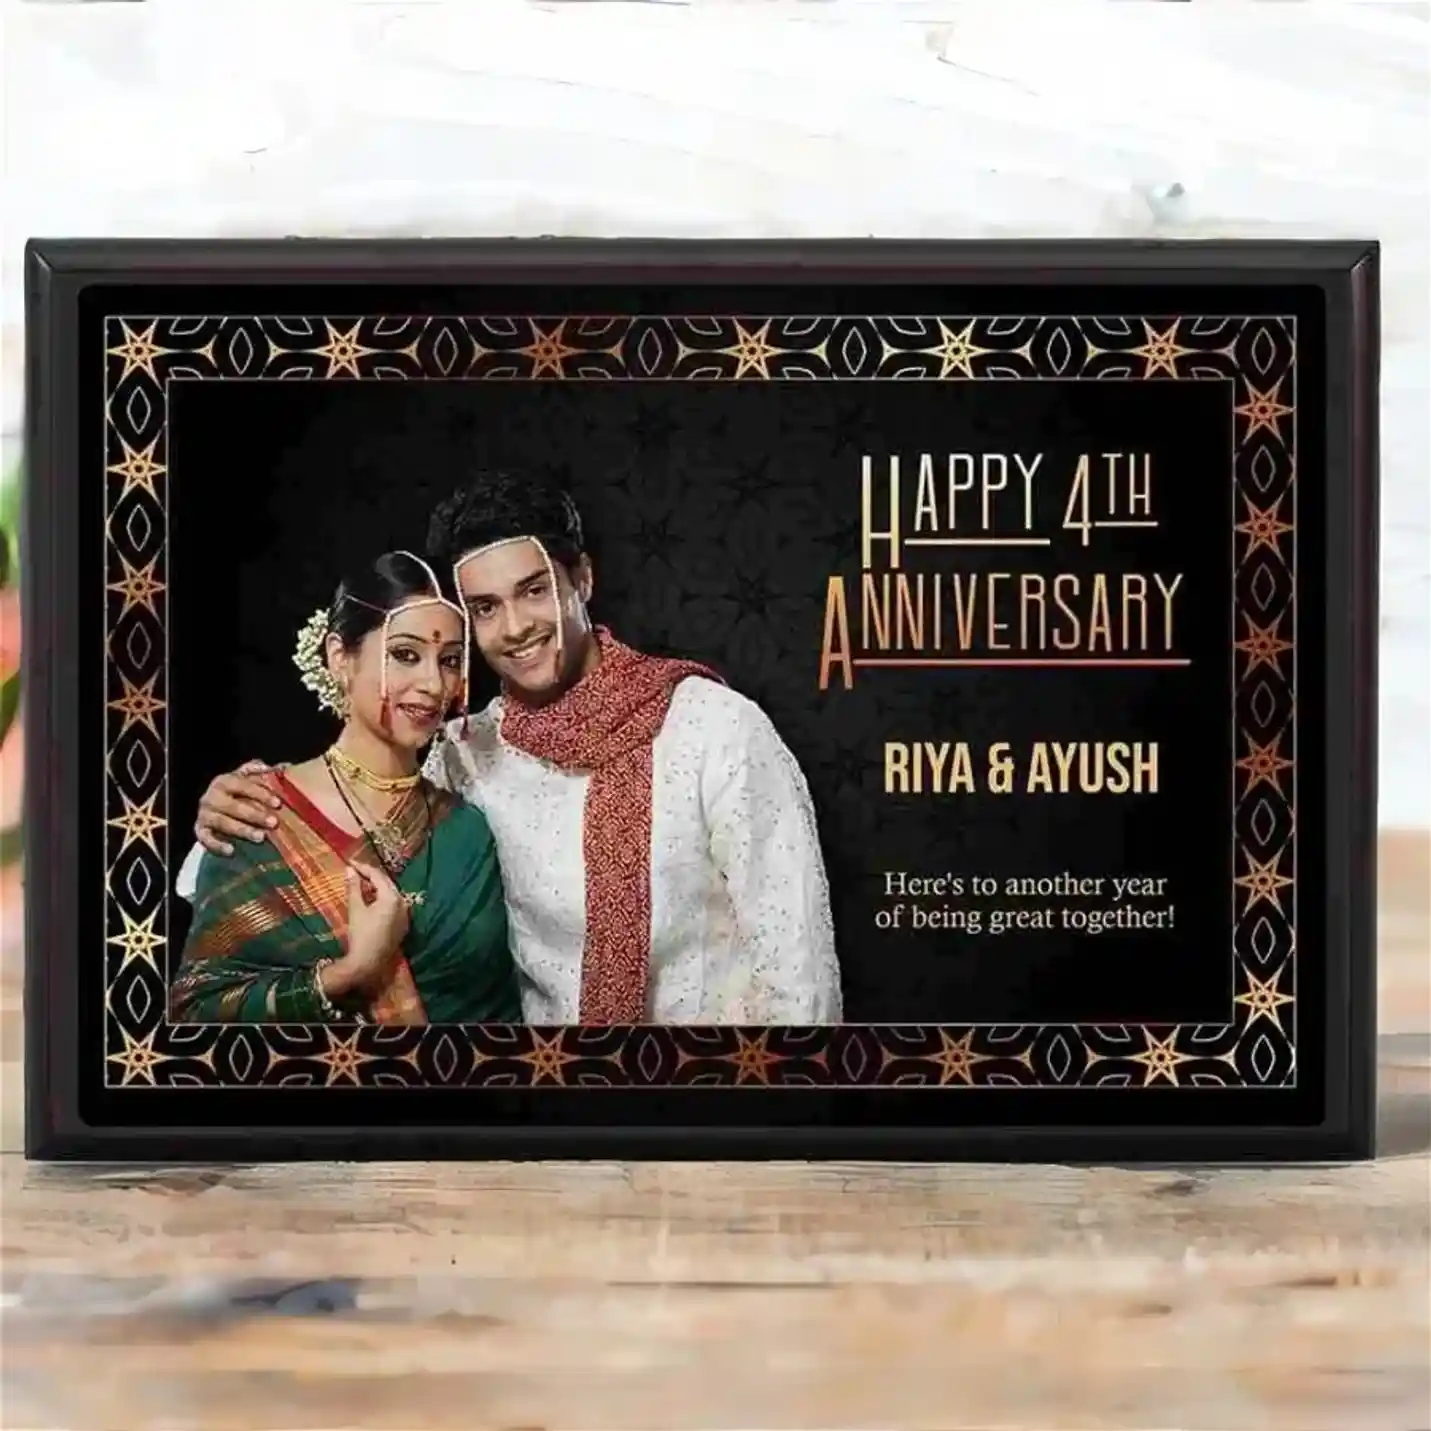 captivating Personalized Metal Photo Product 